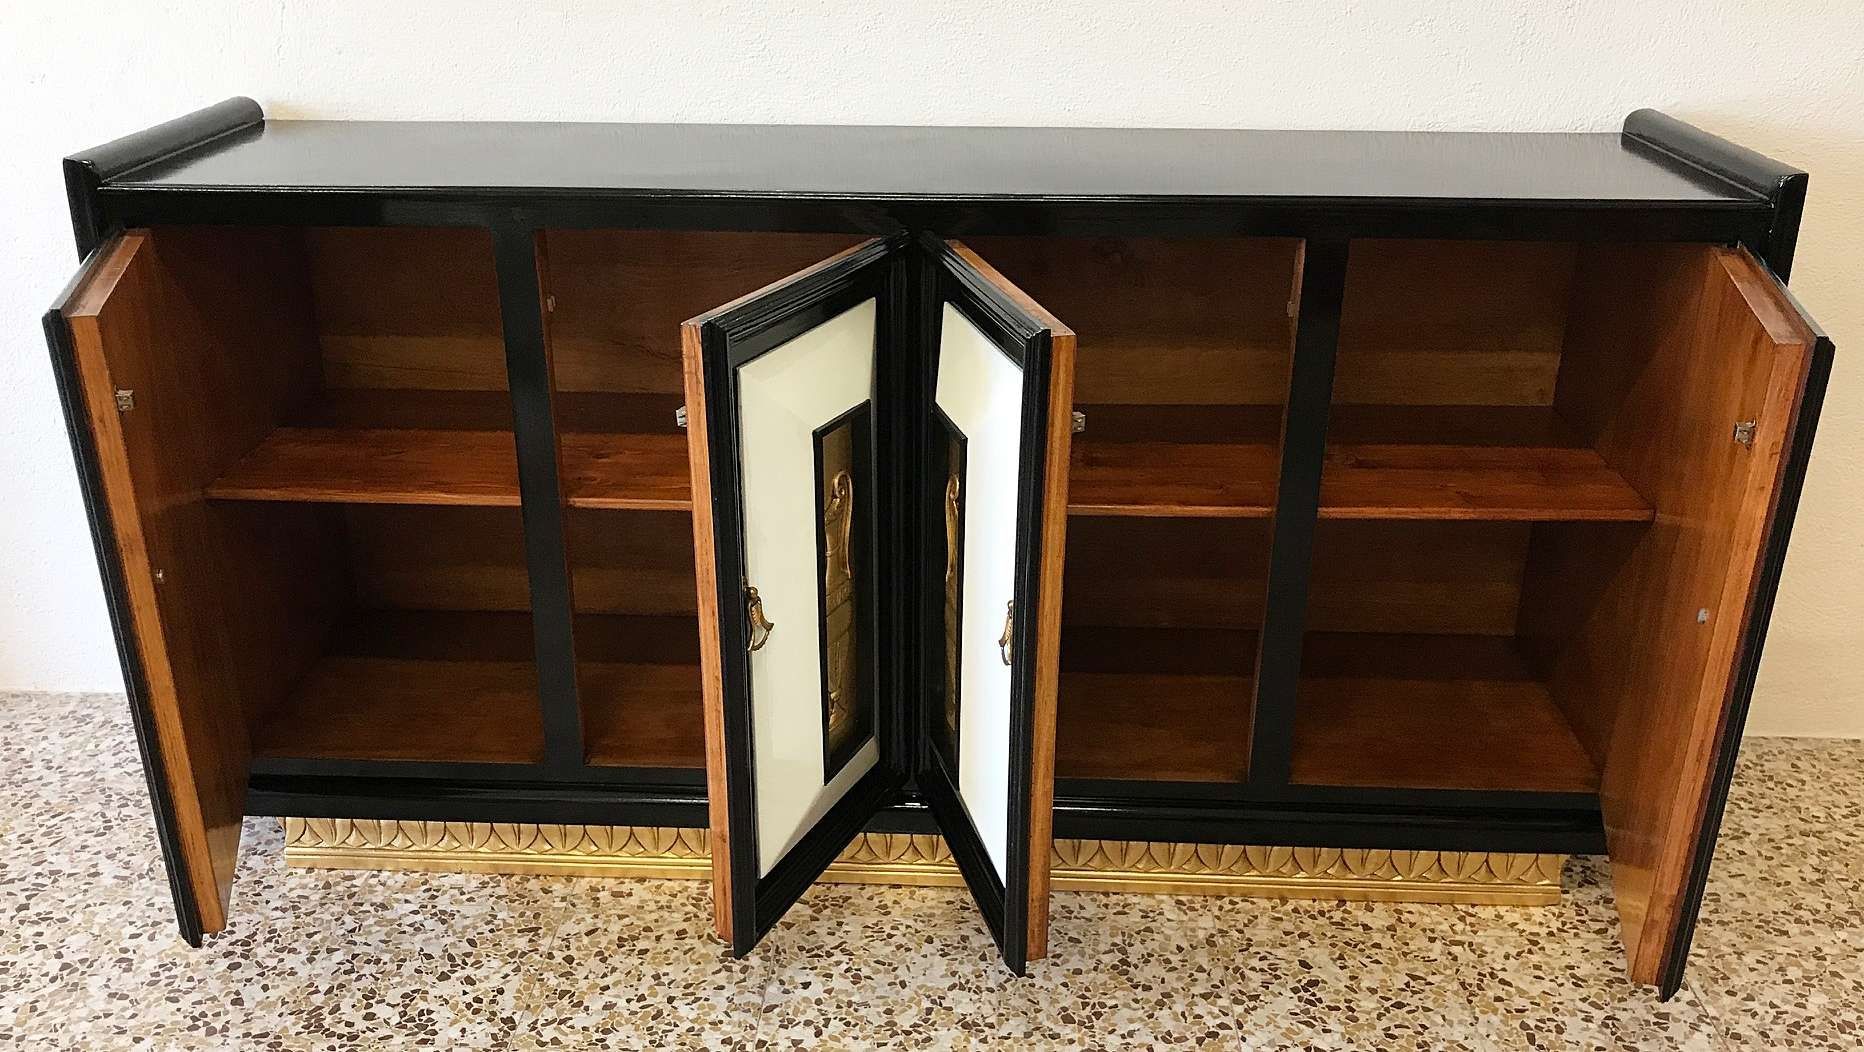 Italian Art Deco Sideboard, 1940s For Sale At Pamono With Regard To Art Deco Sideboards (View 13 of 20)